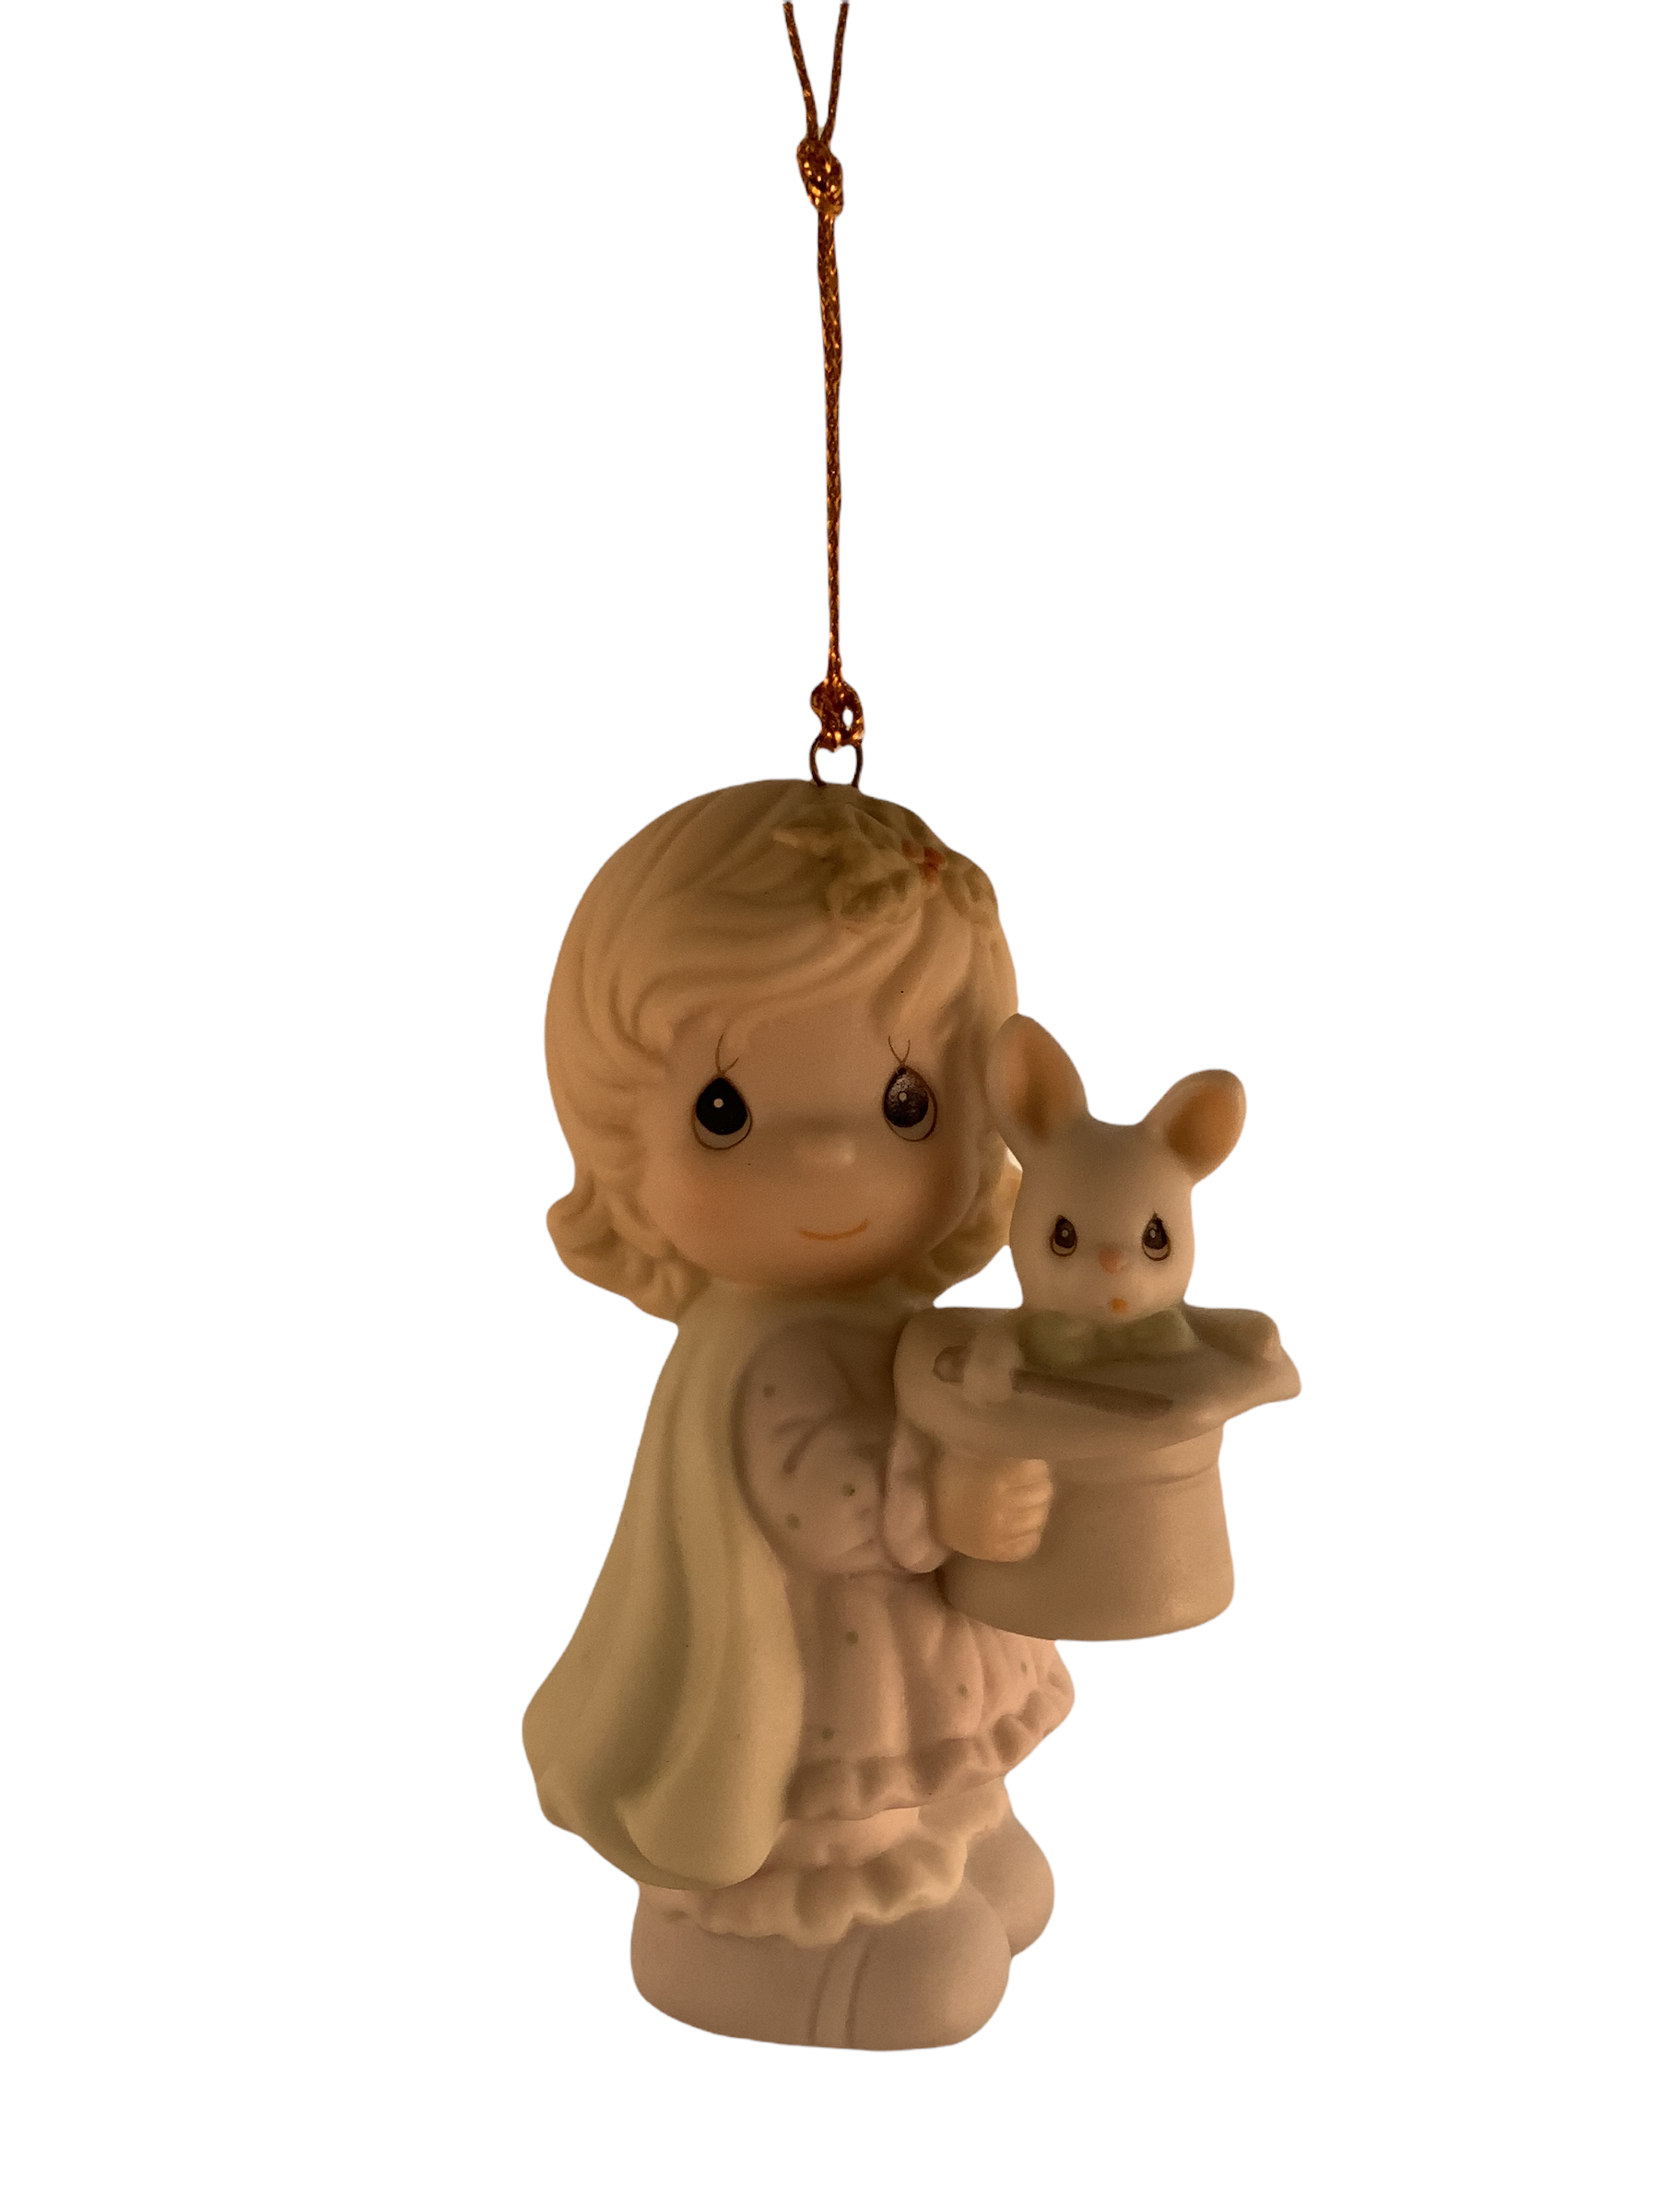 The Magic Starts With You - Precious Moment Ornament